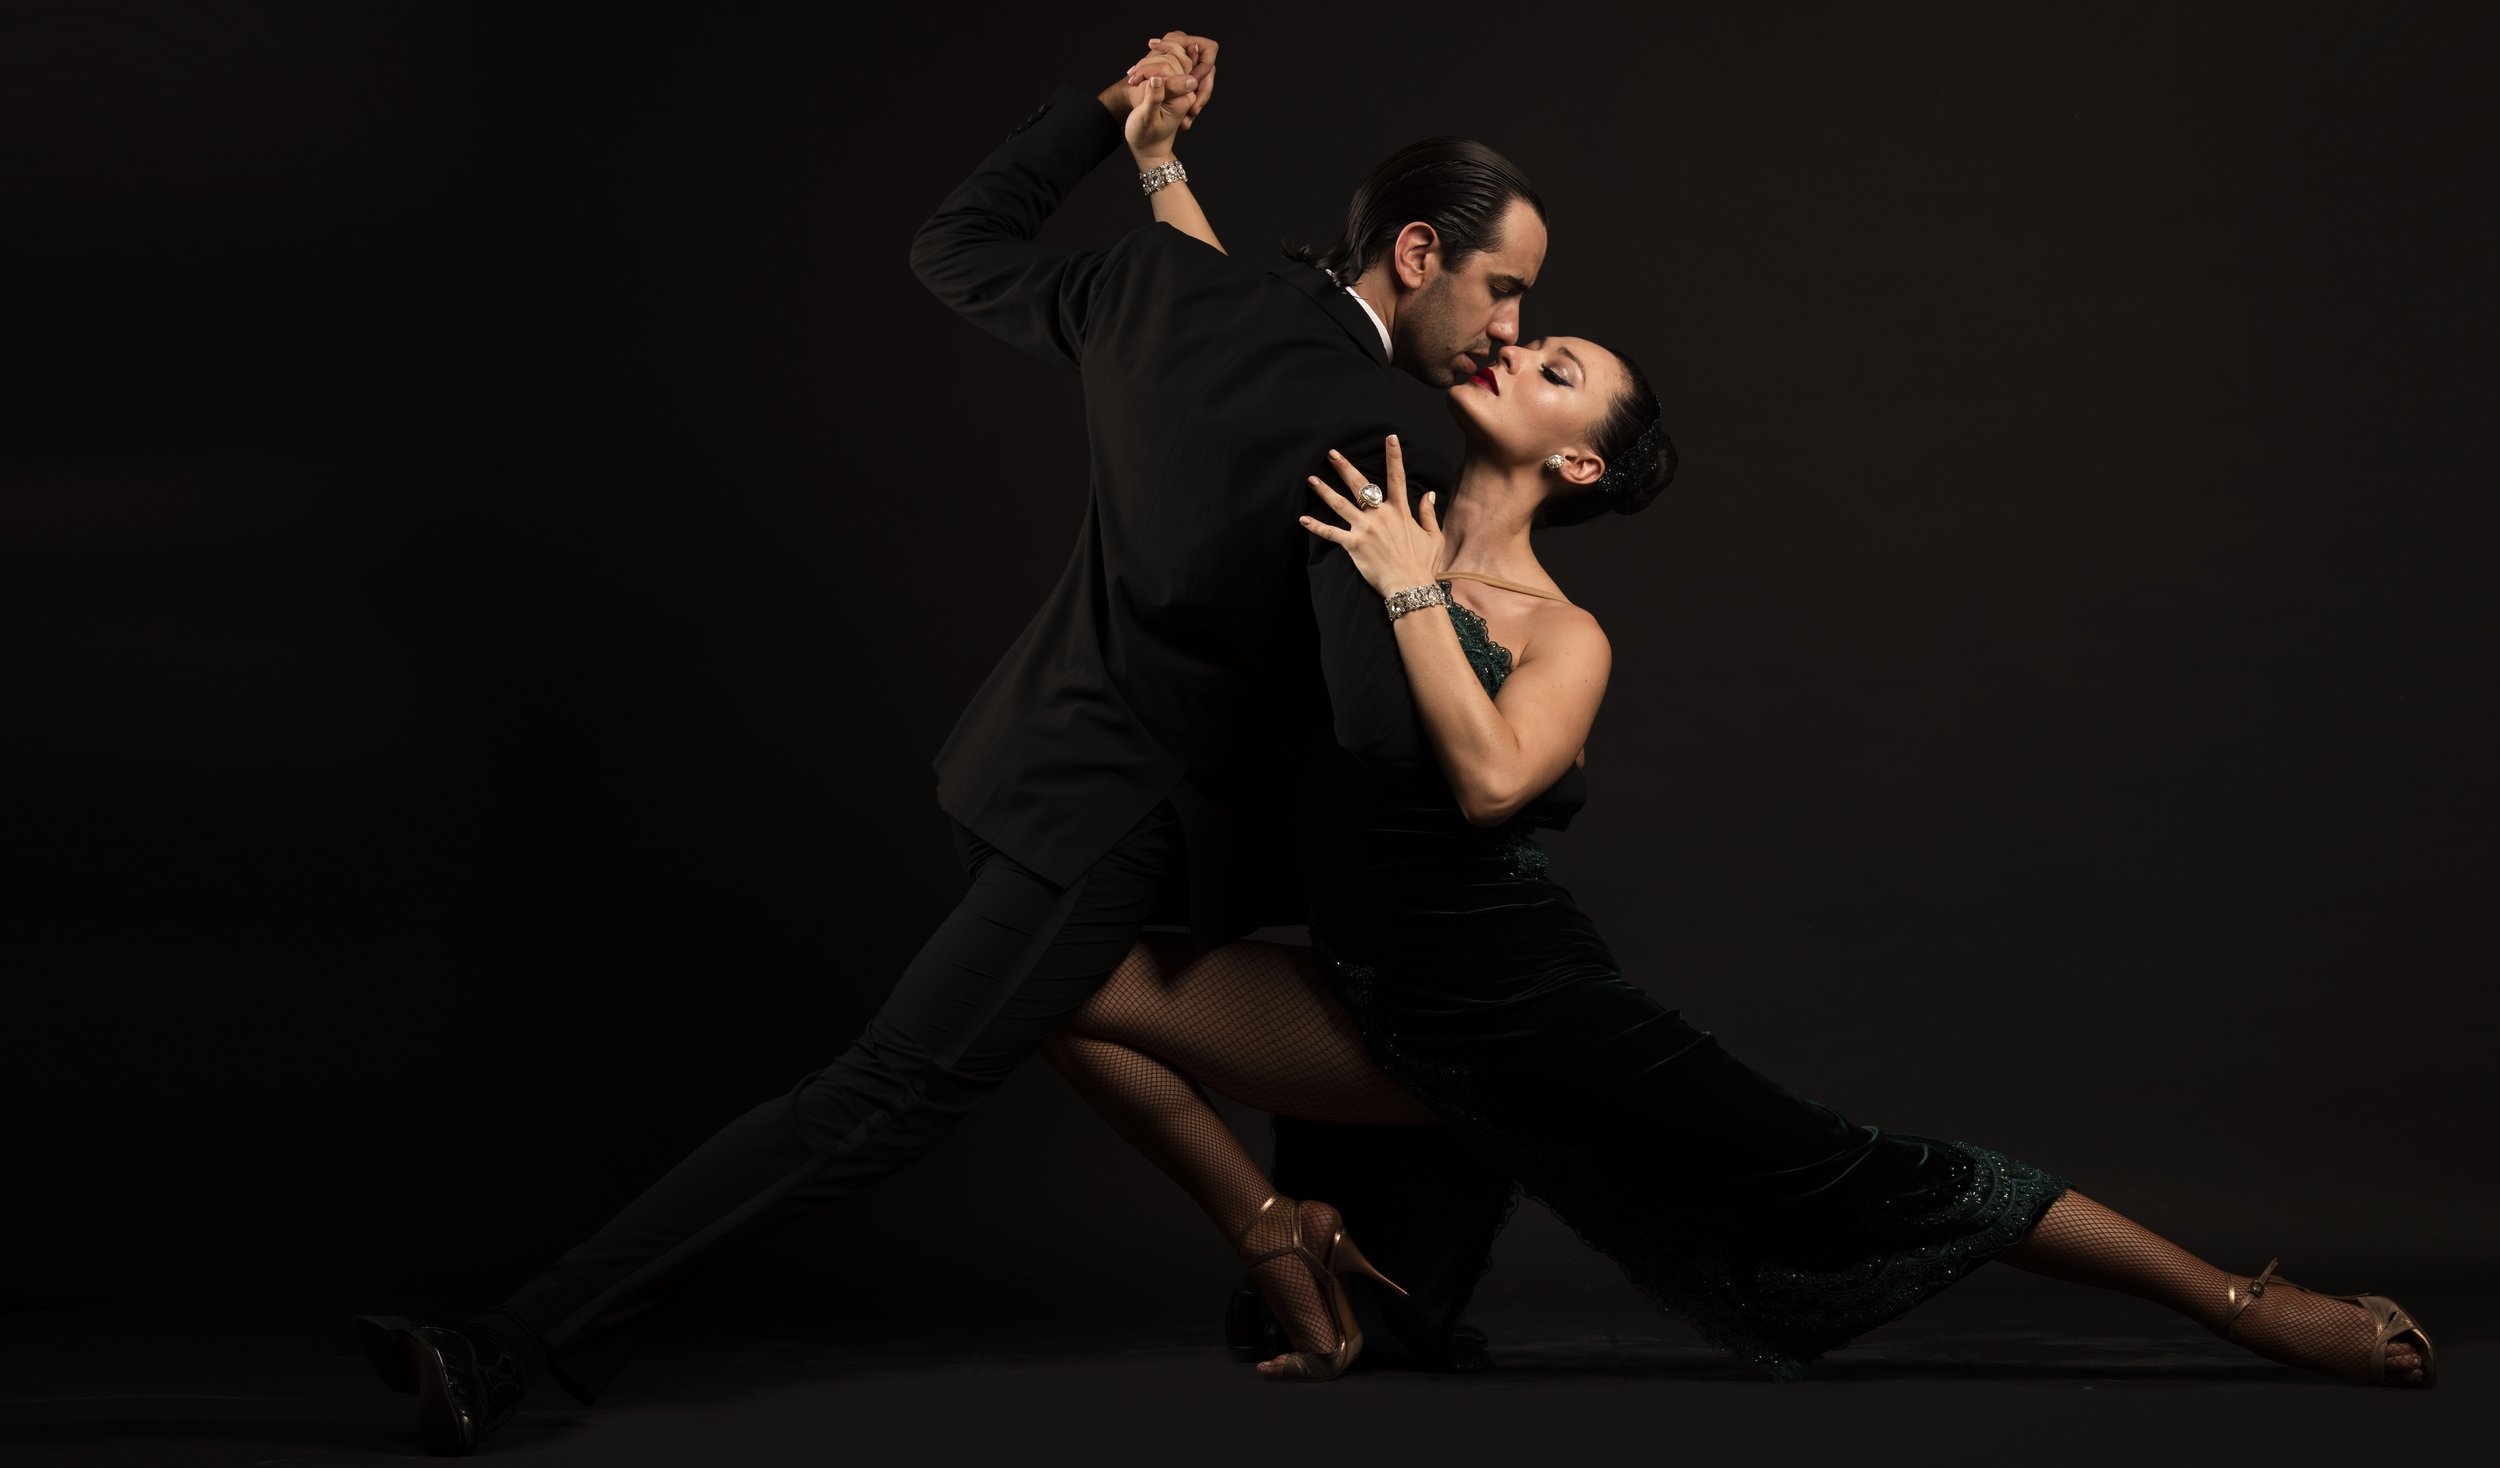 Argentine Tango: Columbia Artists, Dance music, A passionate emotional form of dance, A playful Latin dance. 2500x1470 HD Background.